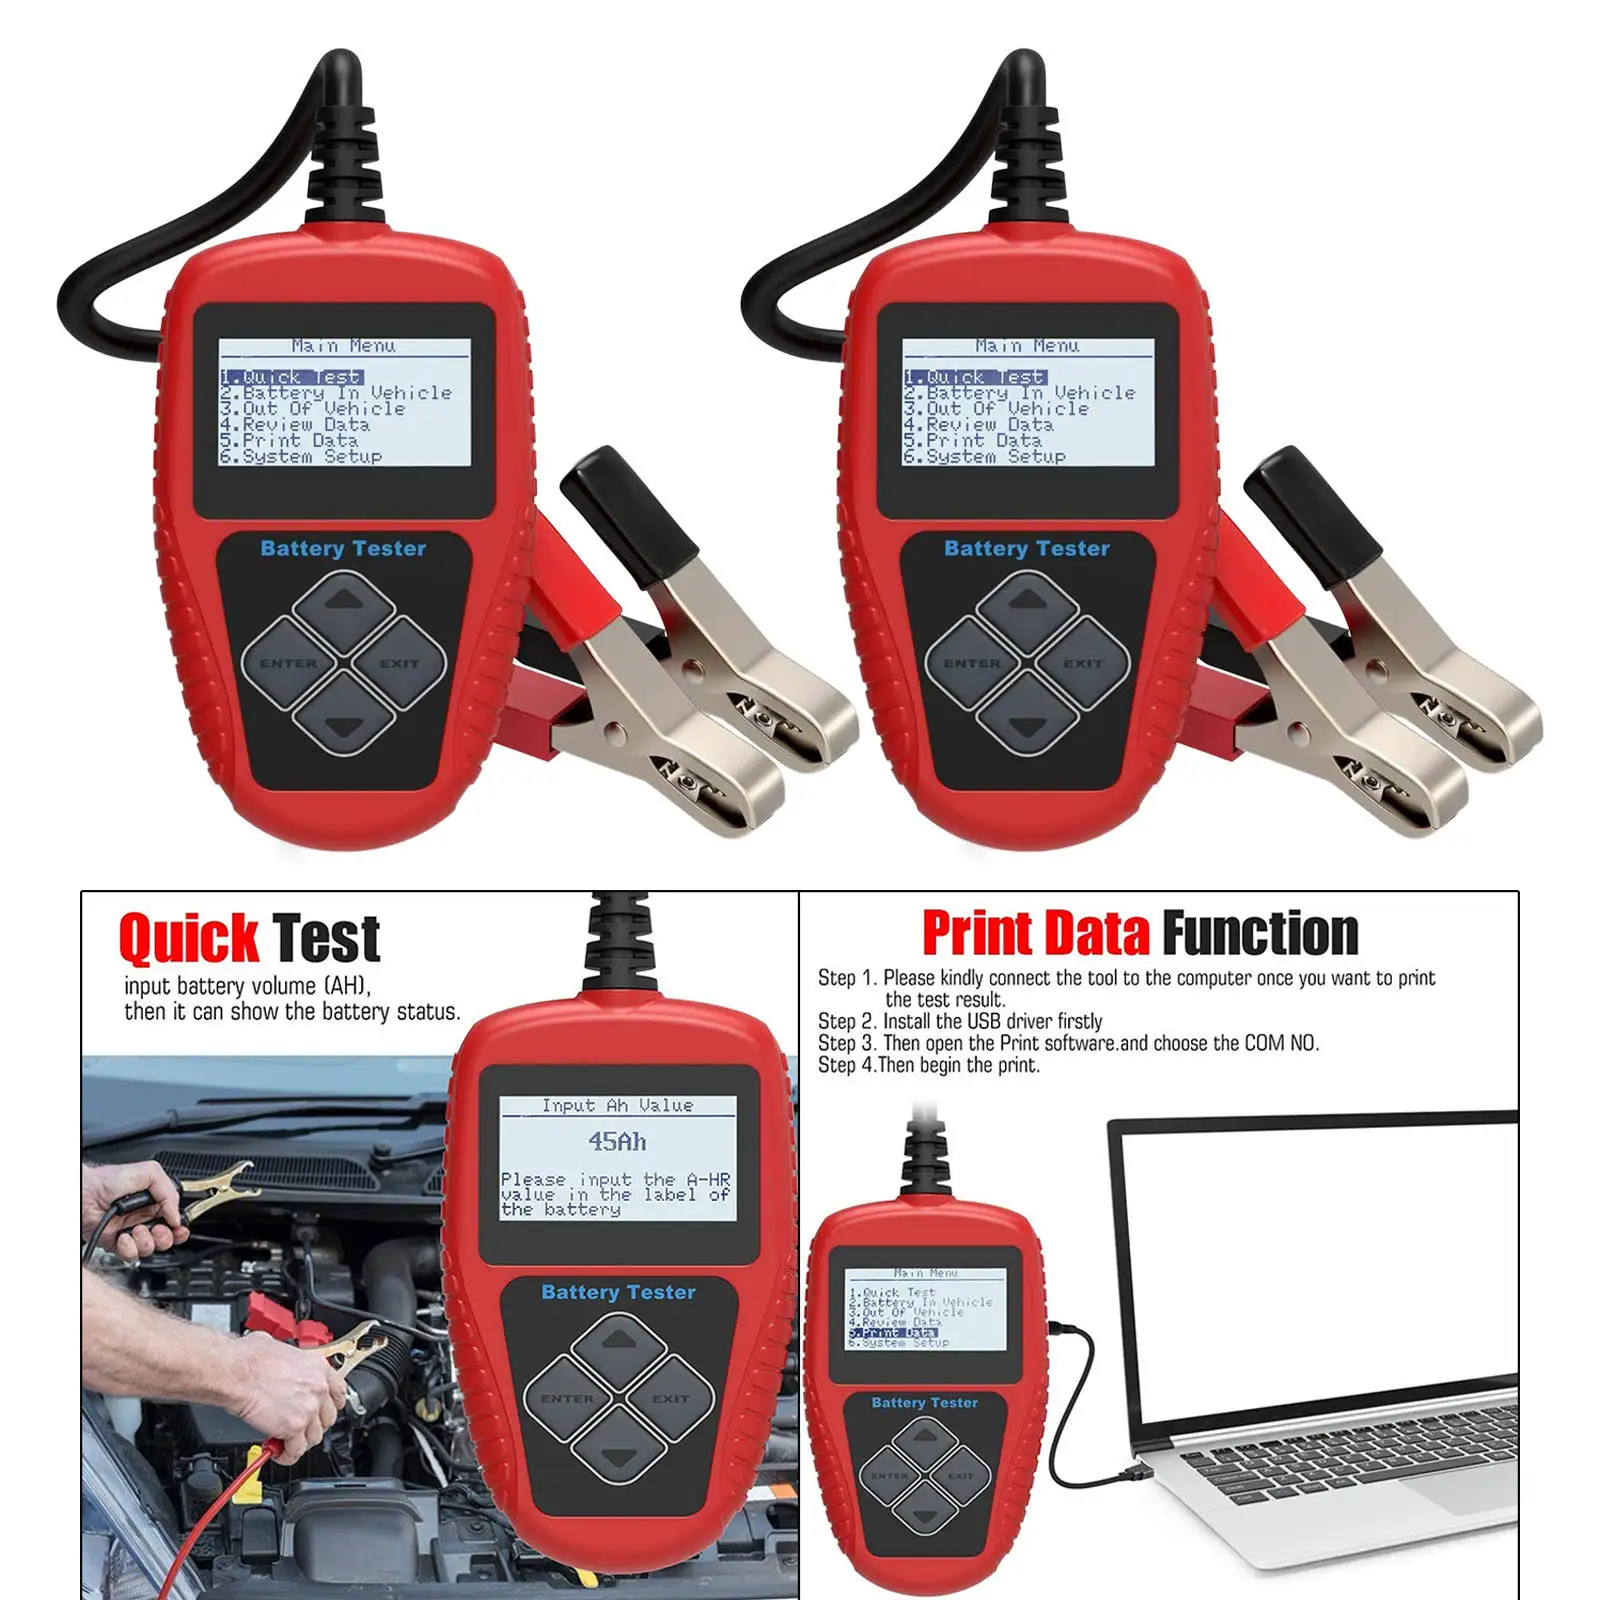 100-2000 CCA BA101 12V Automotive Battery Tester Tool Digital Analyzer with Large LCD Display